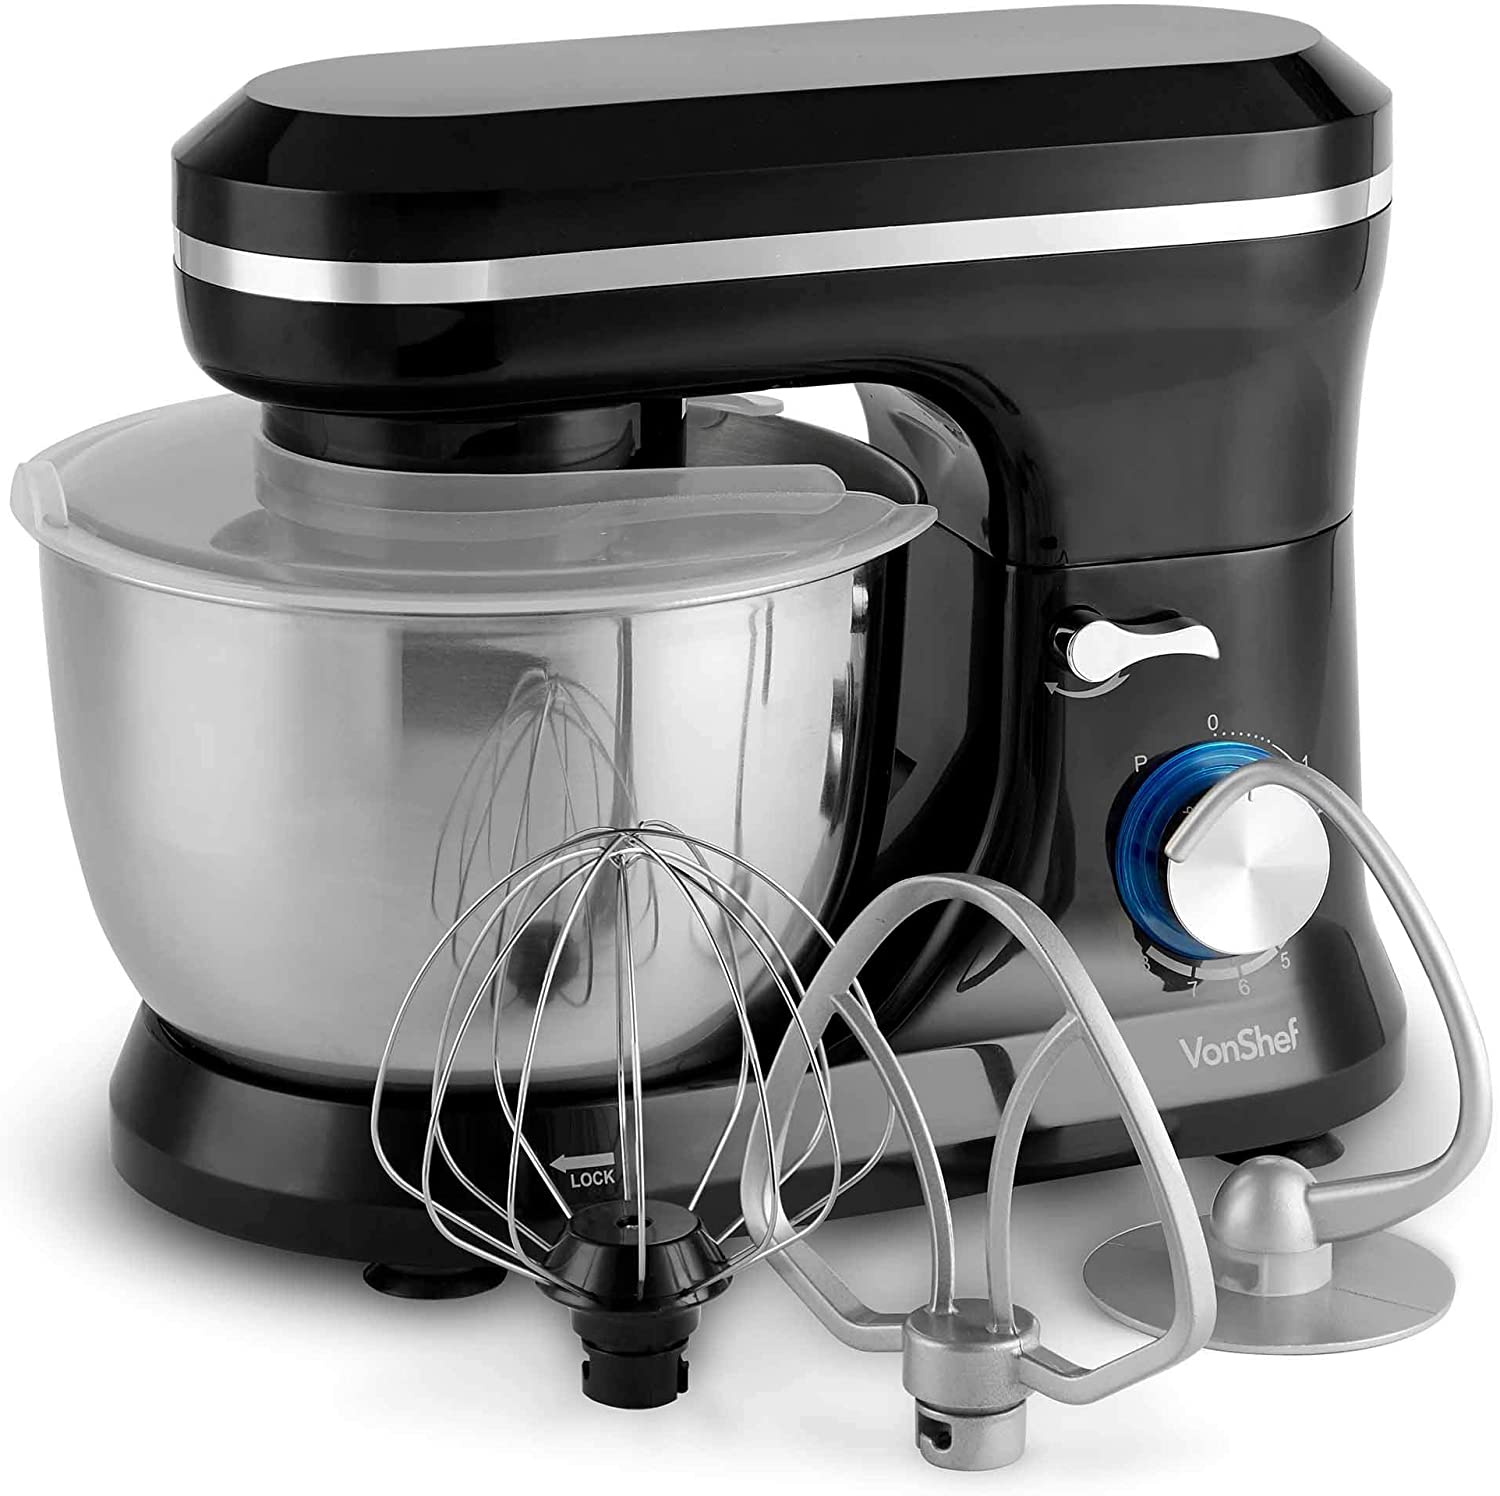 What are the best stand mixers for bakers?